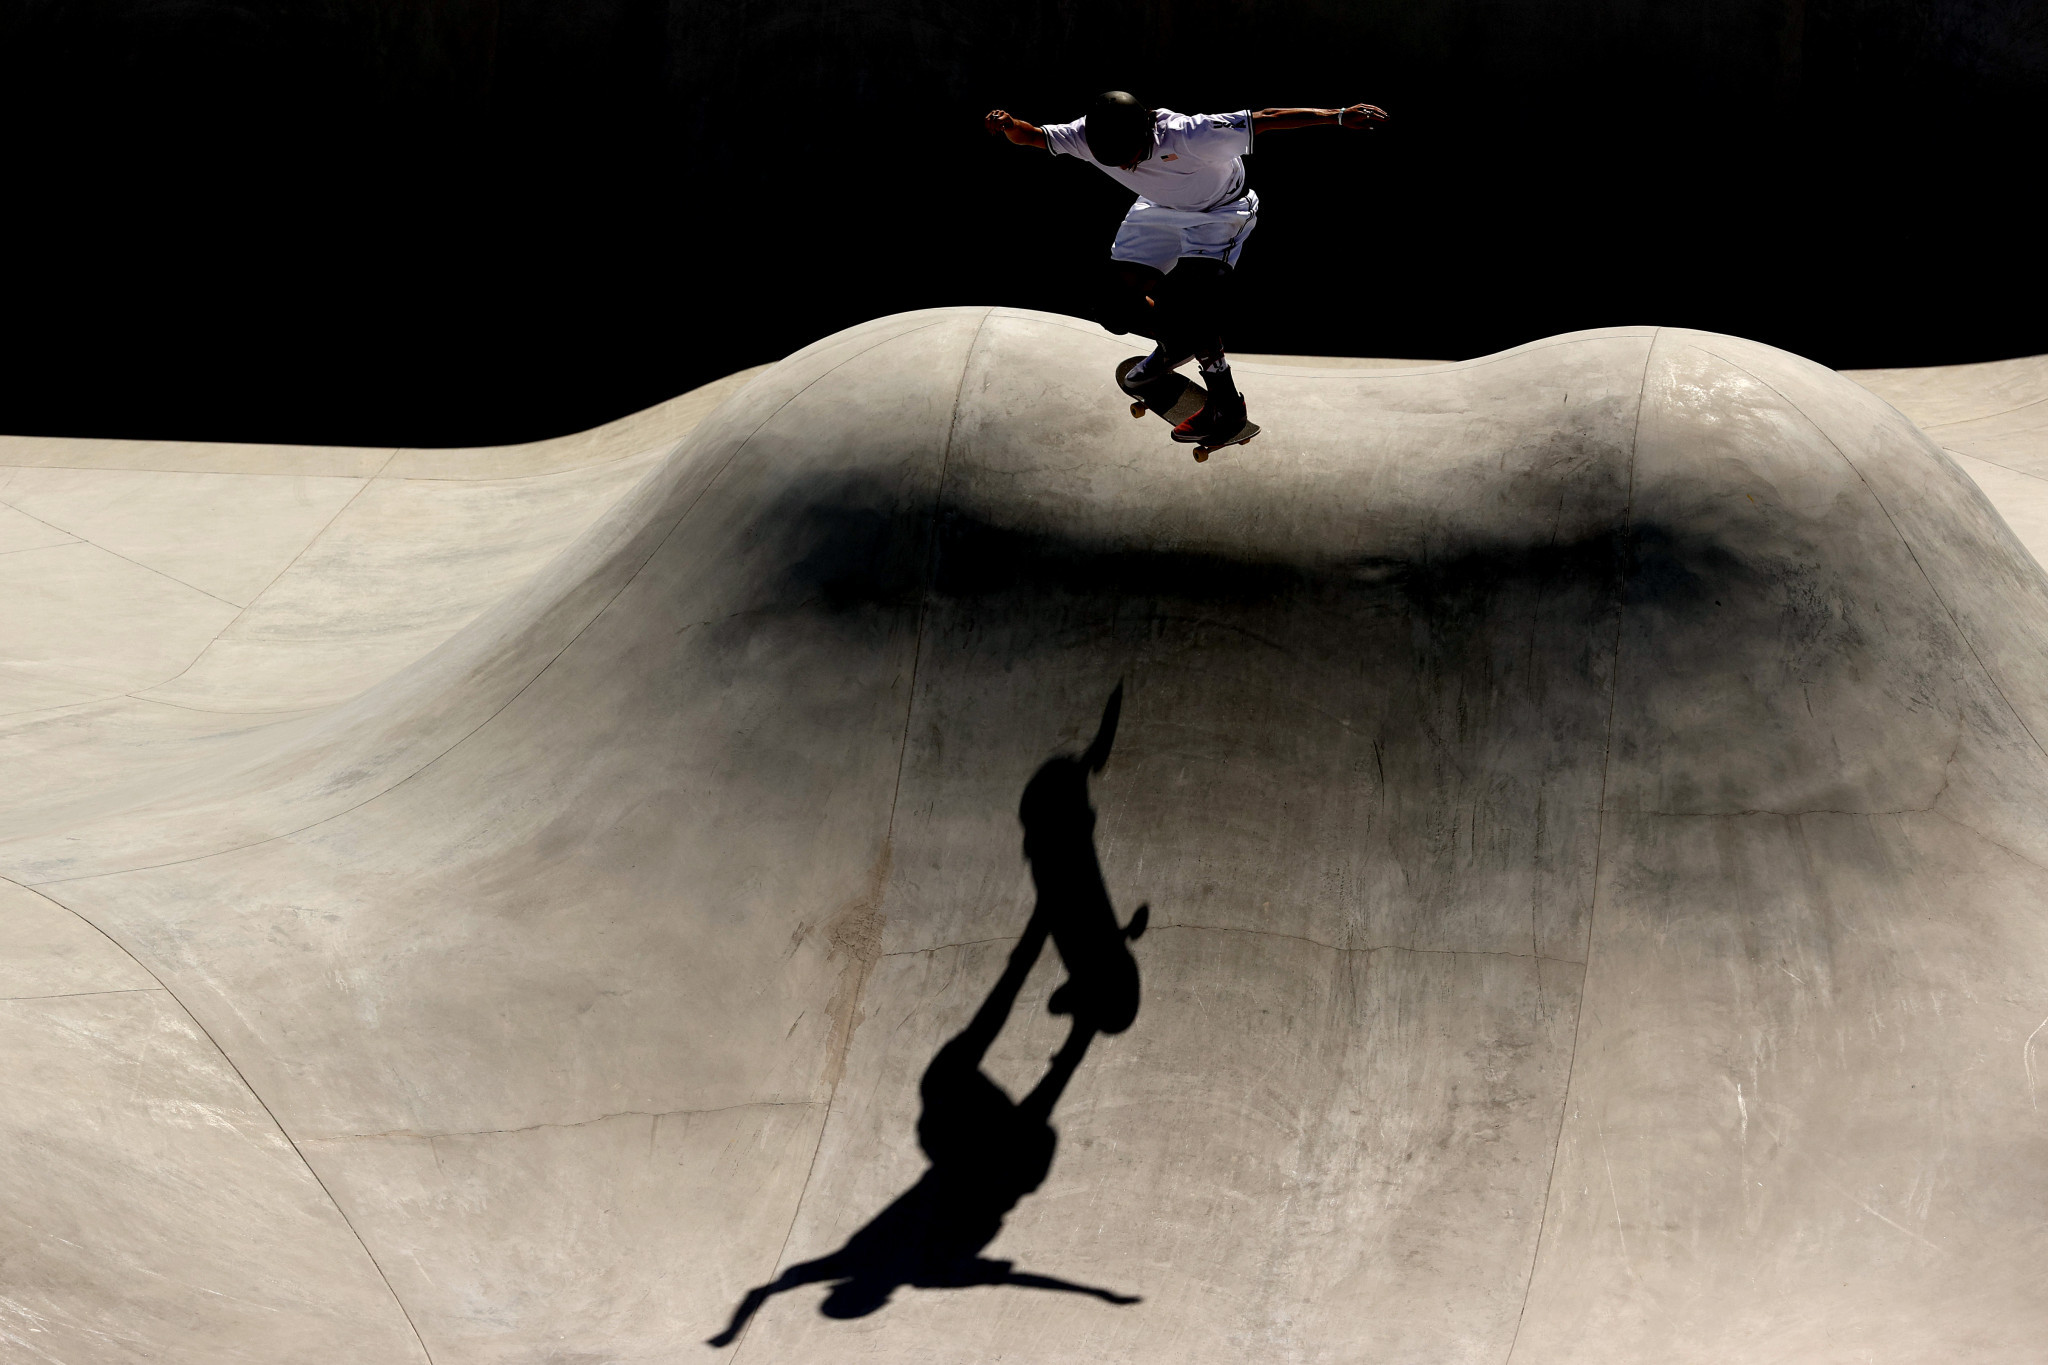 World Skate cancels Rio Street and Park Skateboarding World Championships, but organisers insist events "will take place"